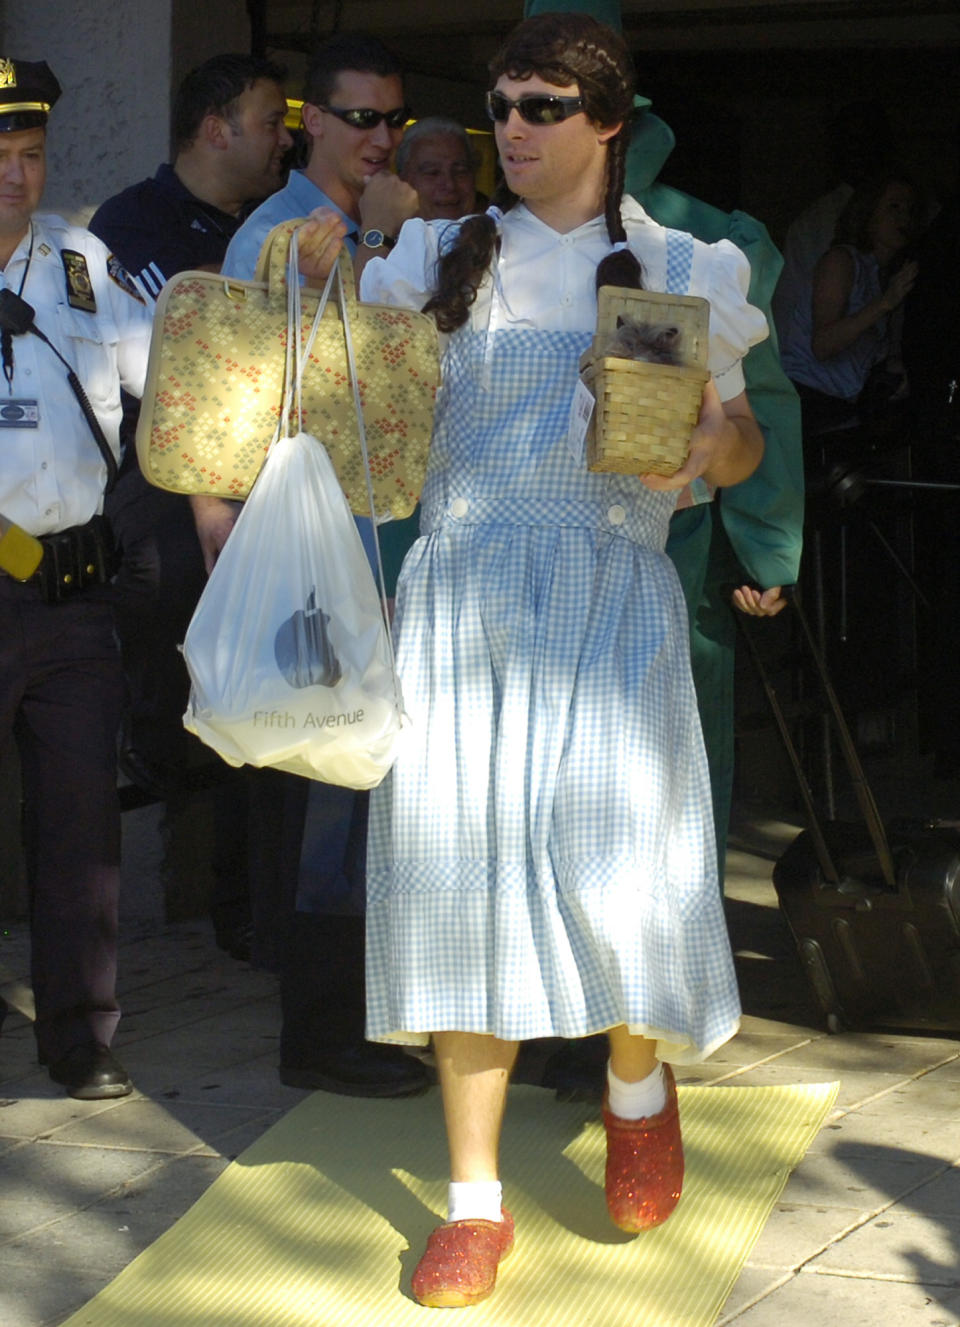 FILE - In this Sept. 24, 2007, file photo, New York Yankees' Ian Kennedy is dressed as Dorothy from "The Wizard of Oz" as he leaves the stadium after a baseball game against the Toronto Blue Jays, at Yankee Stadium in New York. That baseball hazing ritual of dressing up rookies as Wonder Woman, Hooters Girls and Dallas Cowboys cheerleaders is now banned. Major League Baseball created an Anti-Hazing and Anti-Bullying Policy that covers the practice. As part of the sport's new labor deal, set to be ratified by both sides Tuesday, Dec. 13, 2016, the players' union agreed not to contest it. AP Photo/Bill Kostroun, File)